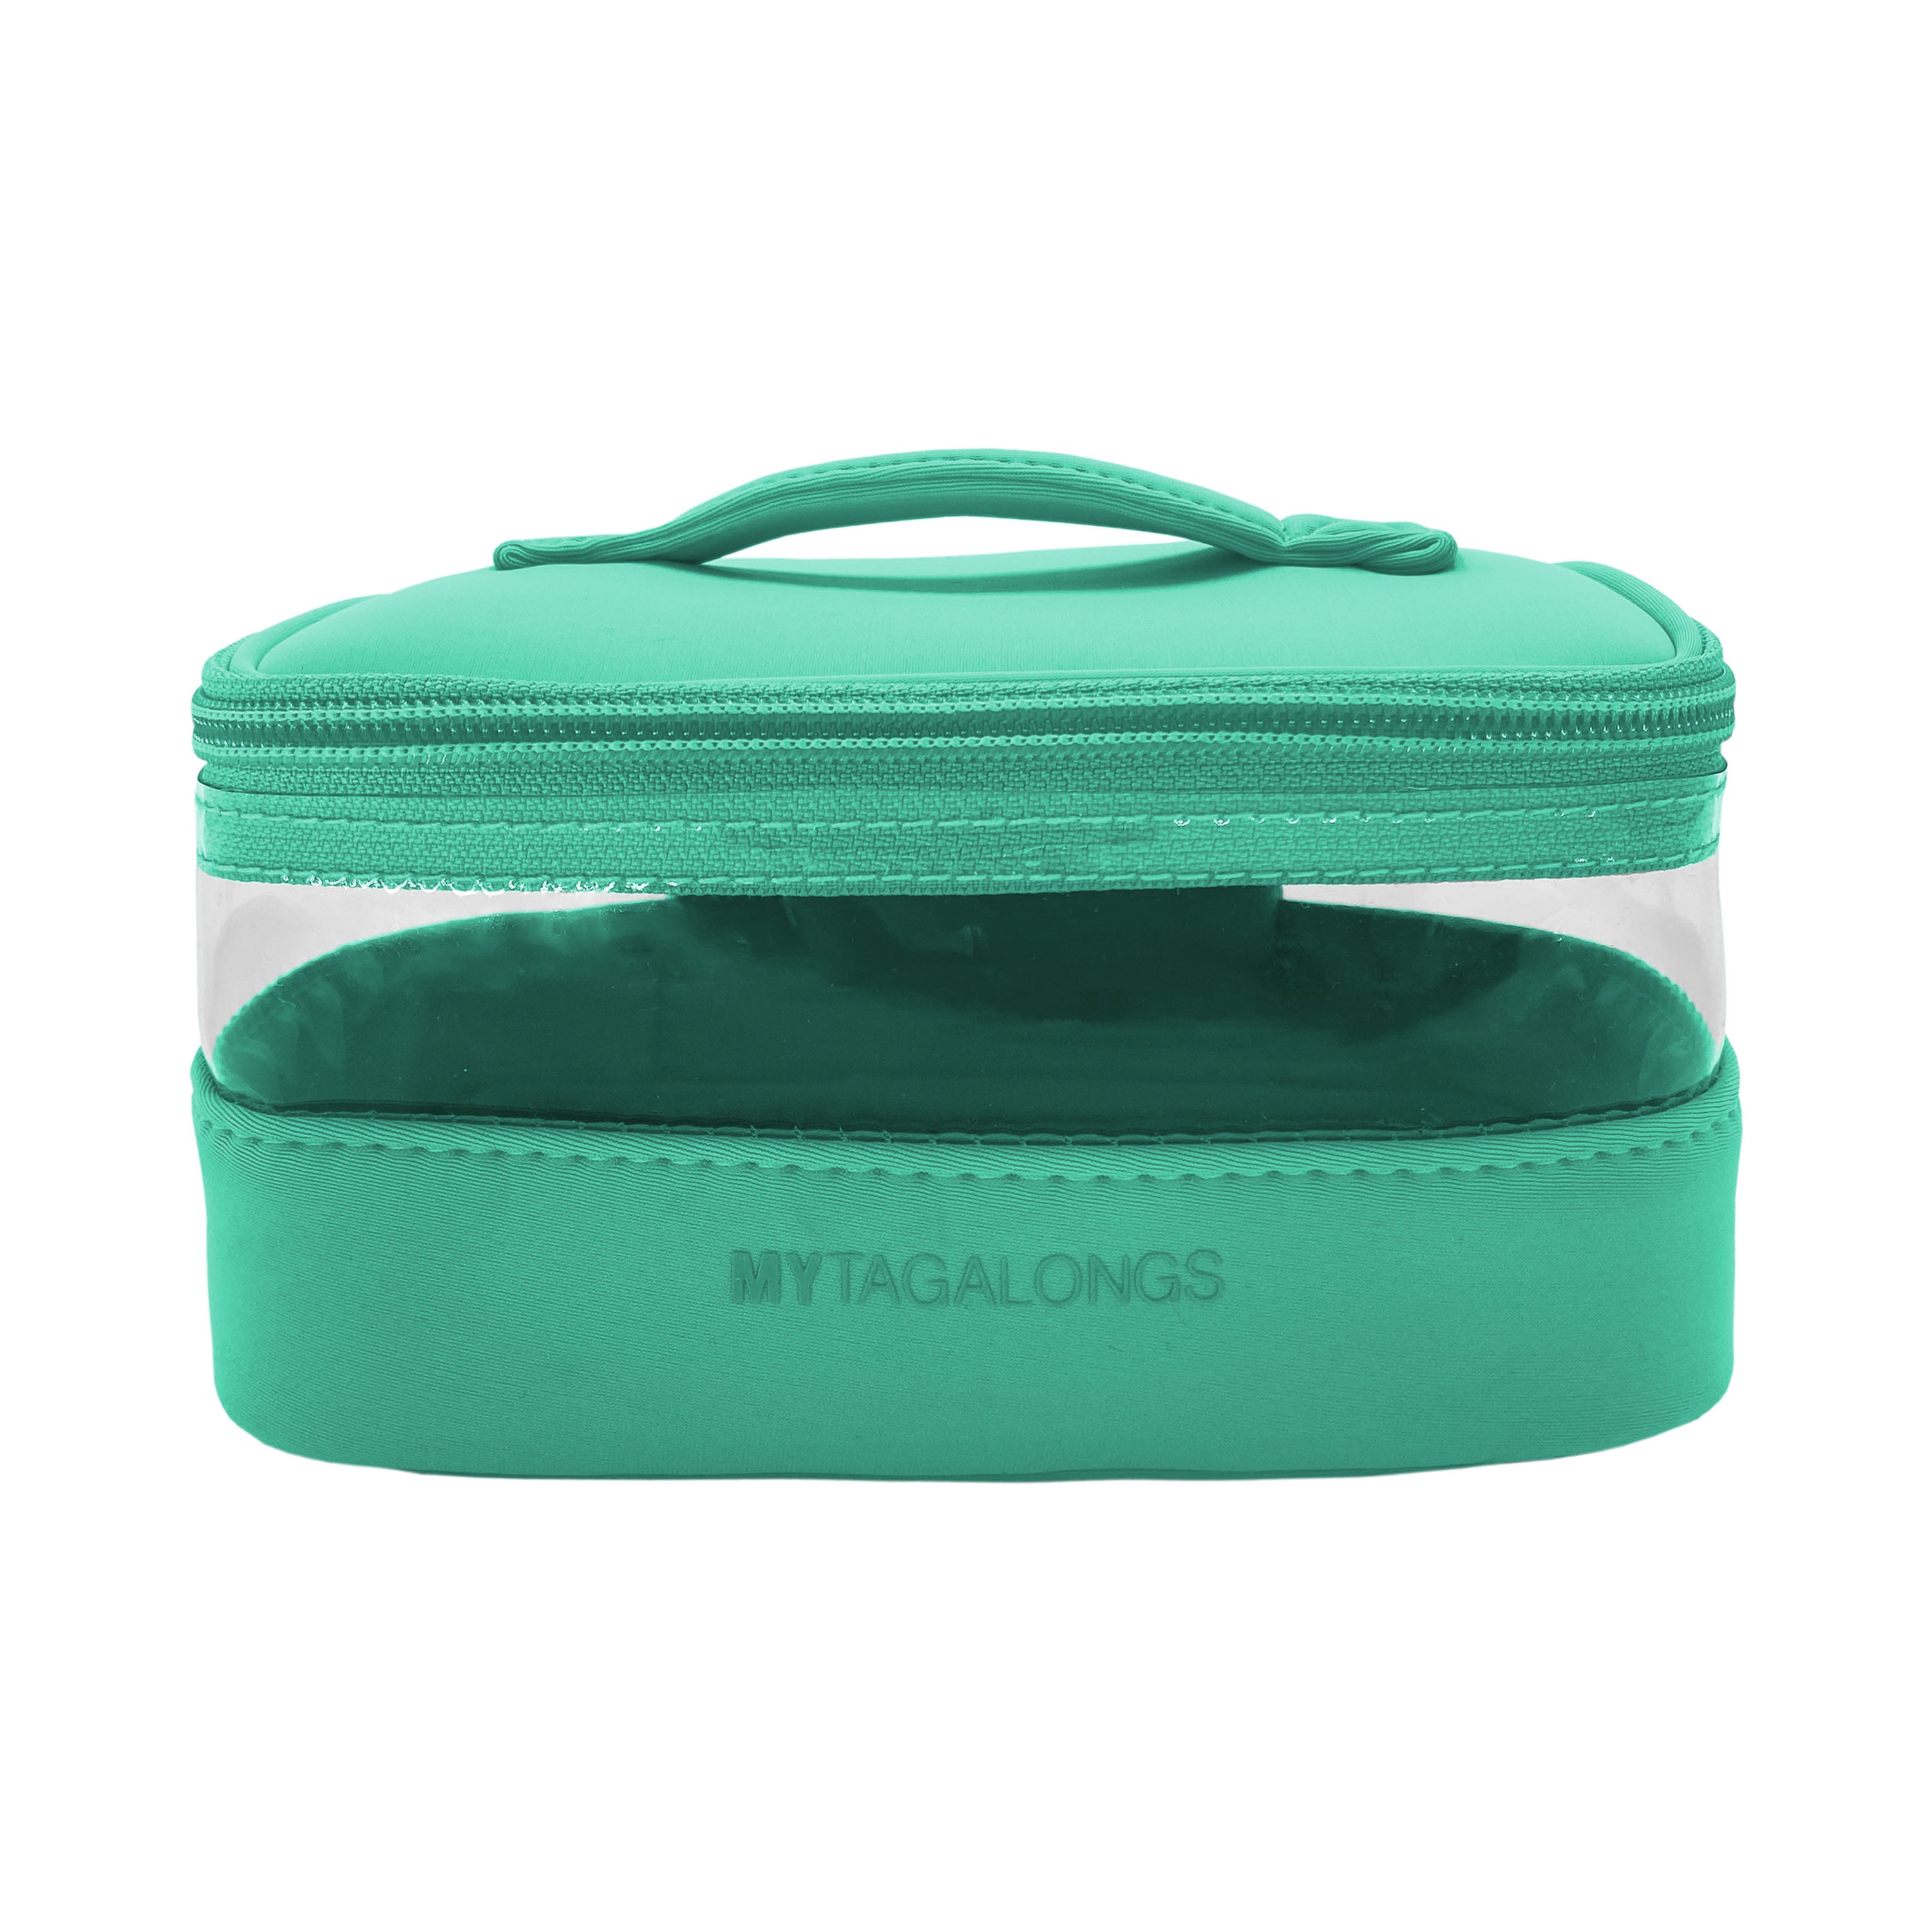 Clover small train case shape cosmetic bag with clear window